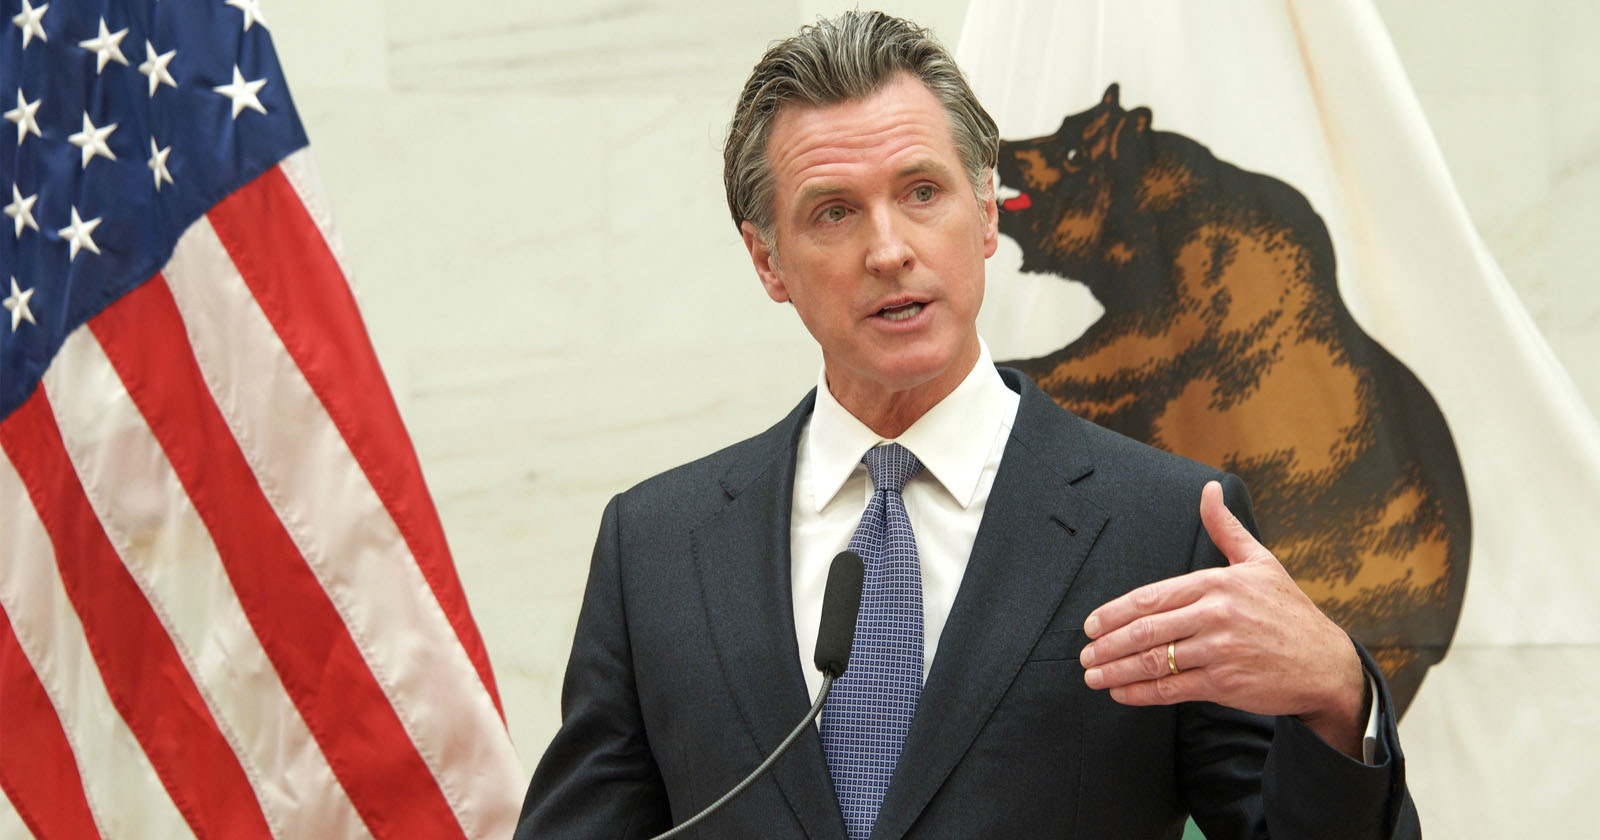 California Governor Signs Bill Designed to Protect Minors on Social Media